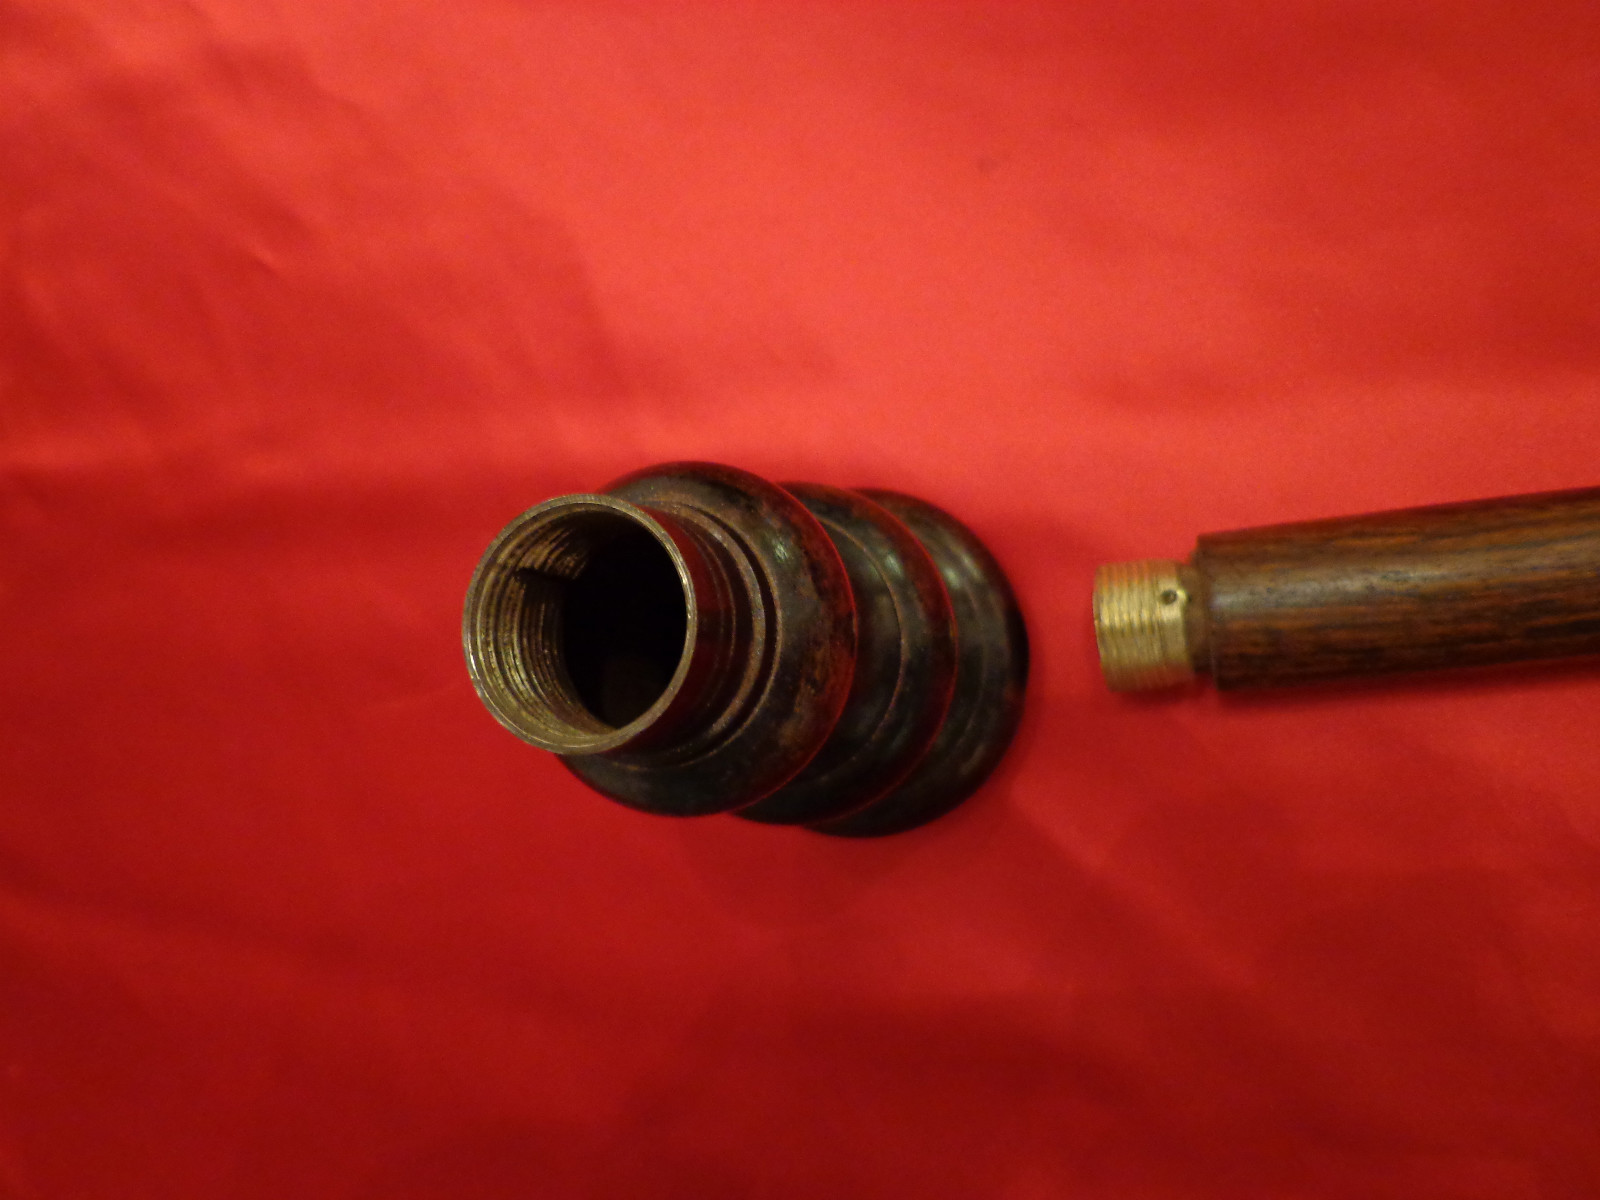 Cane with Compass and Secret Compartment